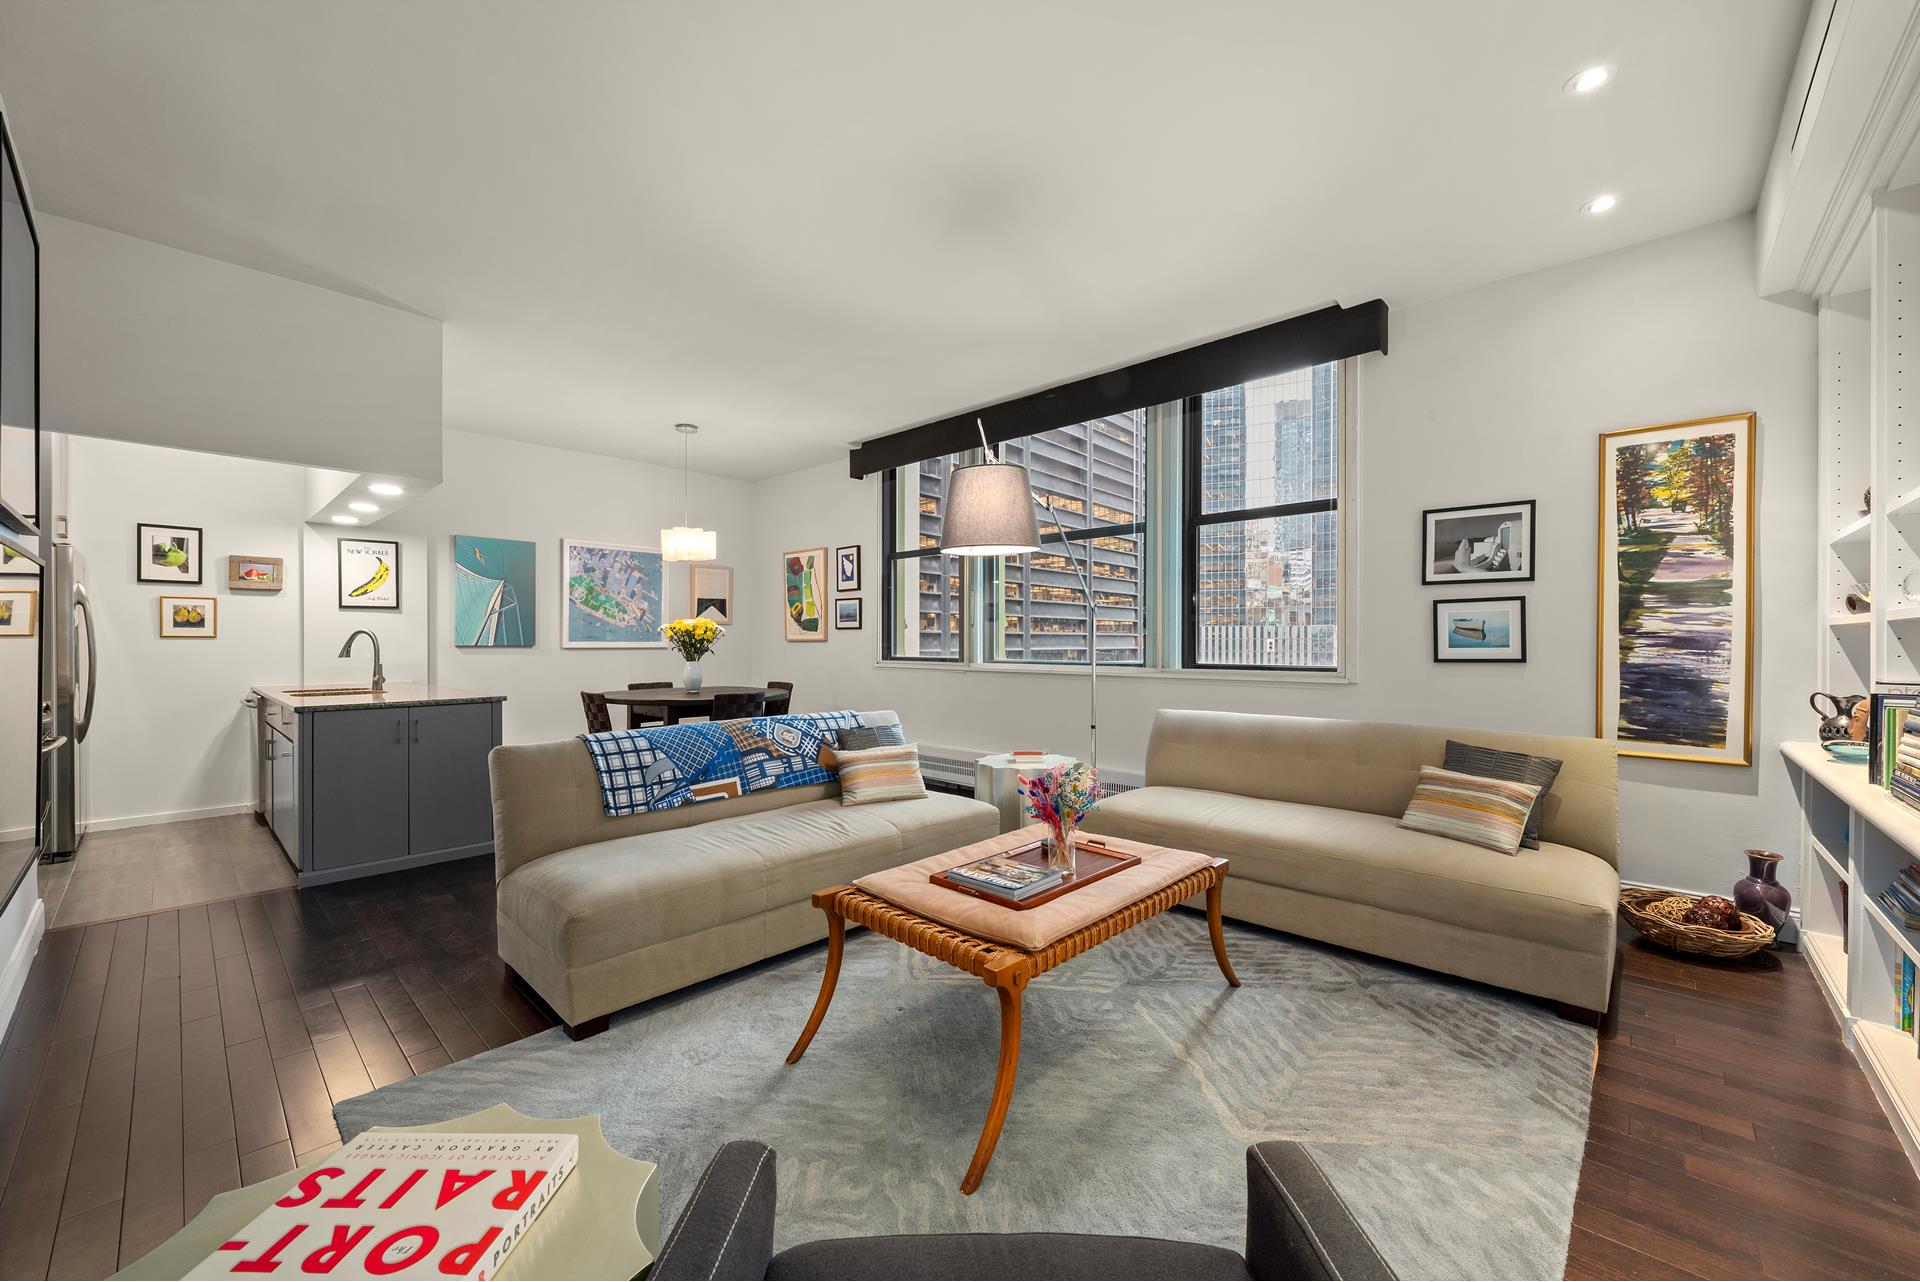 176 Broadway 11B, Financial District, Downtown, NYC - 2 Bedrooms  
2 Bathrooms  
5 Rooms - 